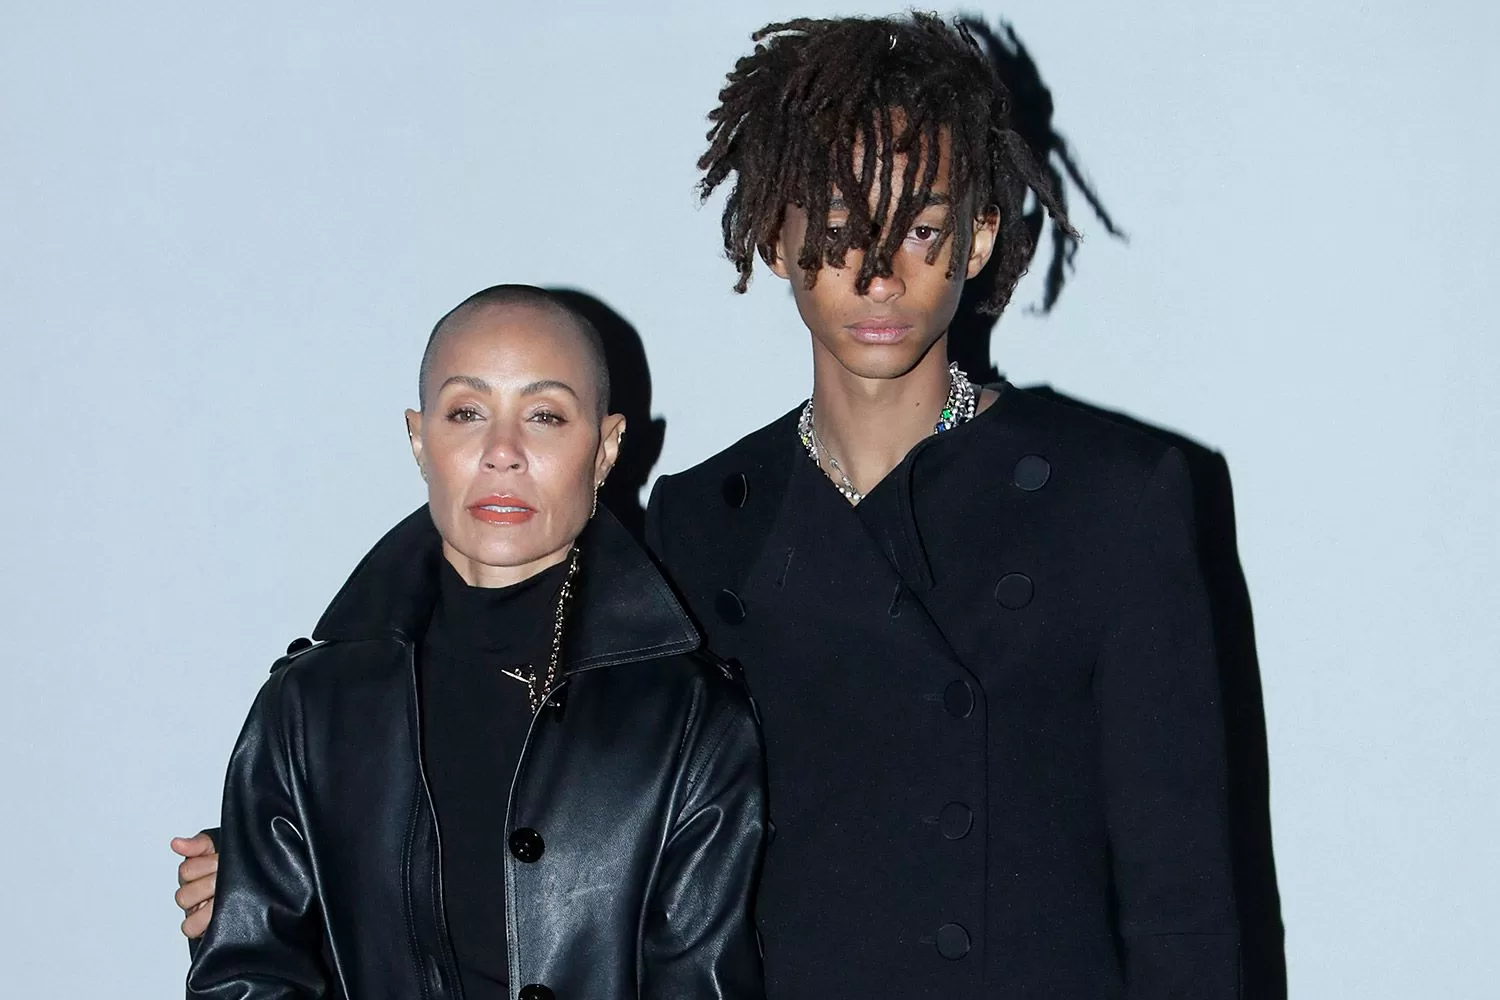 jaden-smith-mom-jada-brought-psychedelic-drugs-into-home-062923-tout-d834a6d0284246a79ce110f25dba05f5